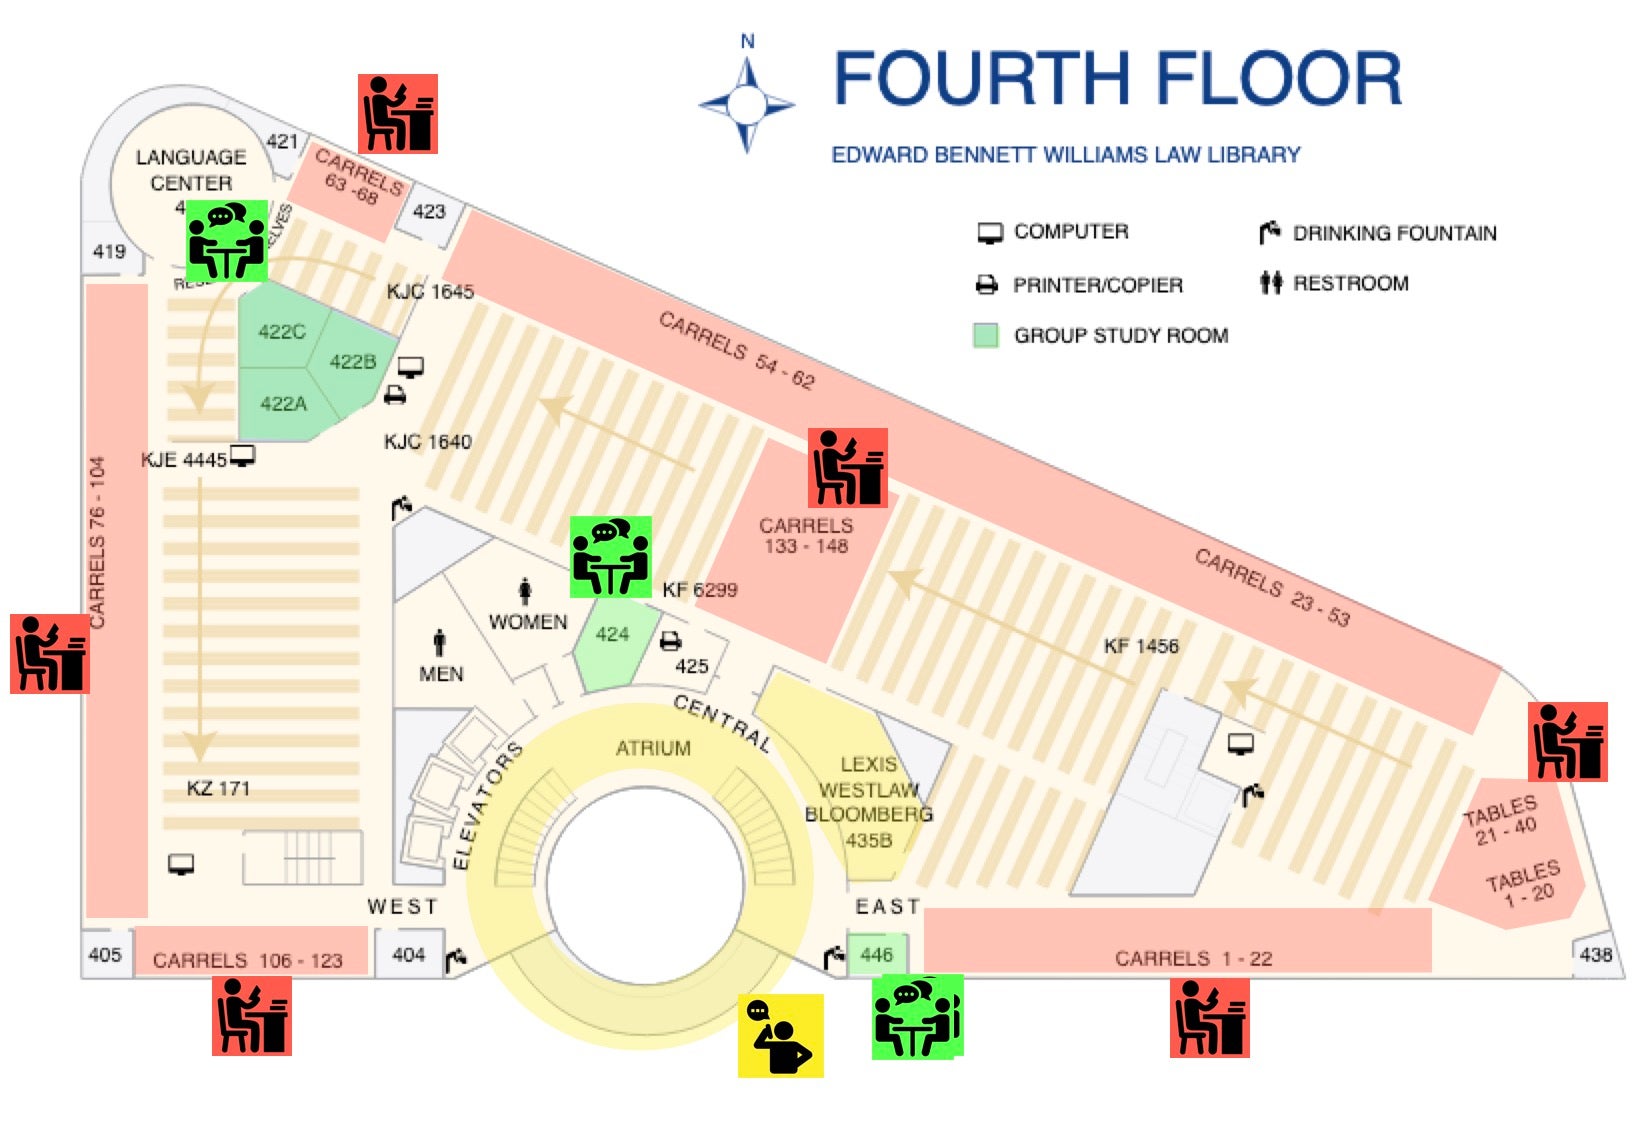 Fourth floor map with noise zones